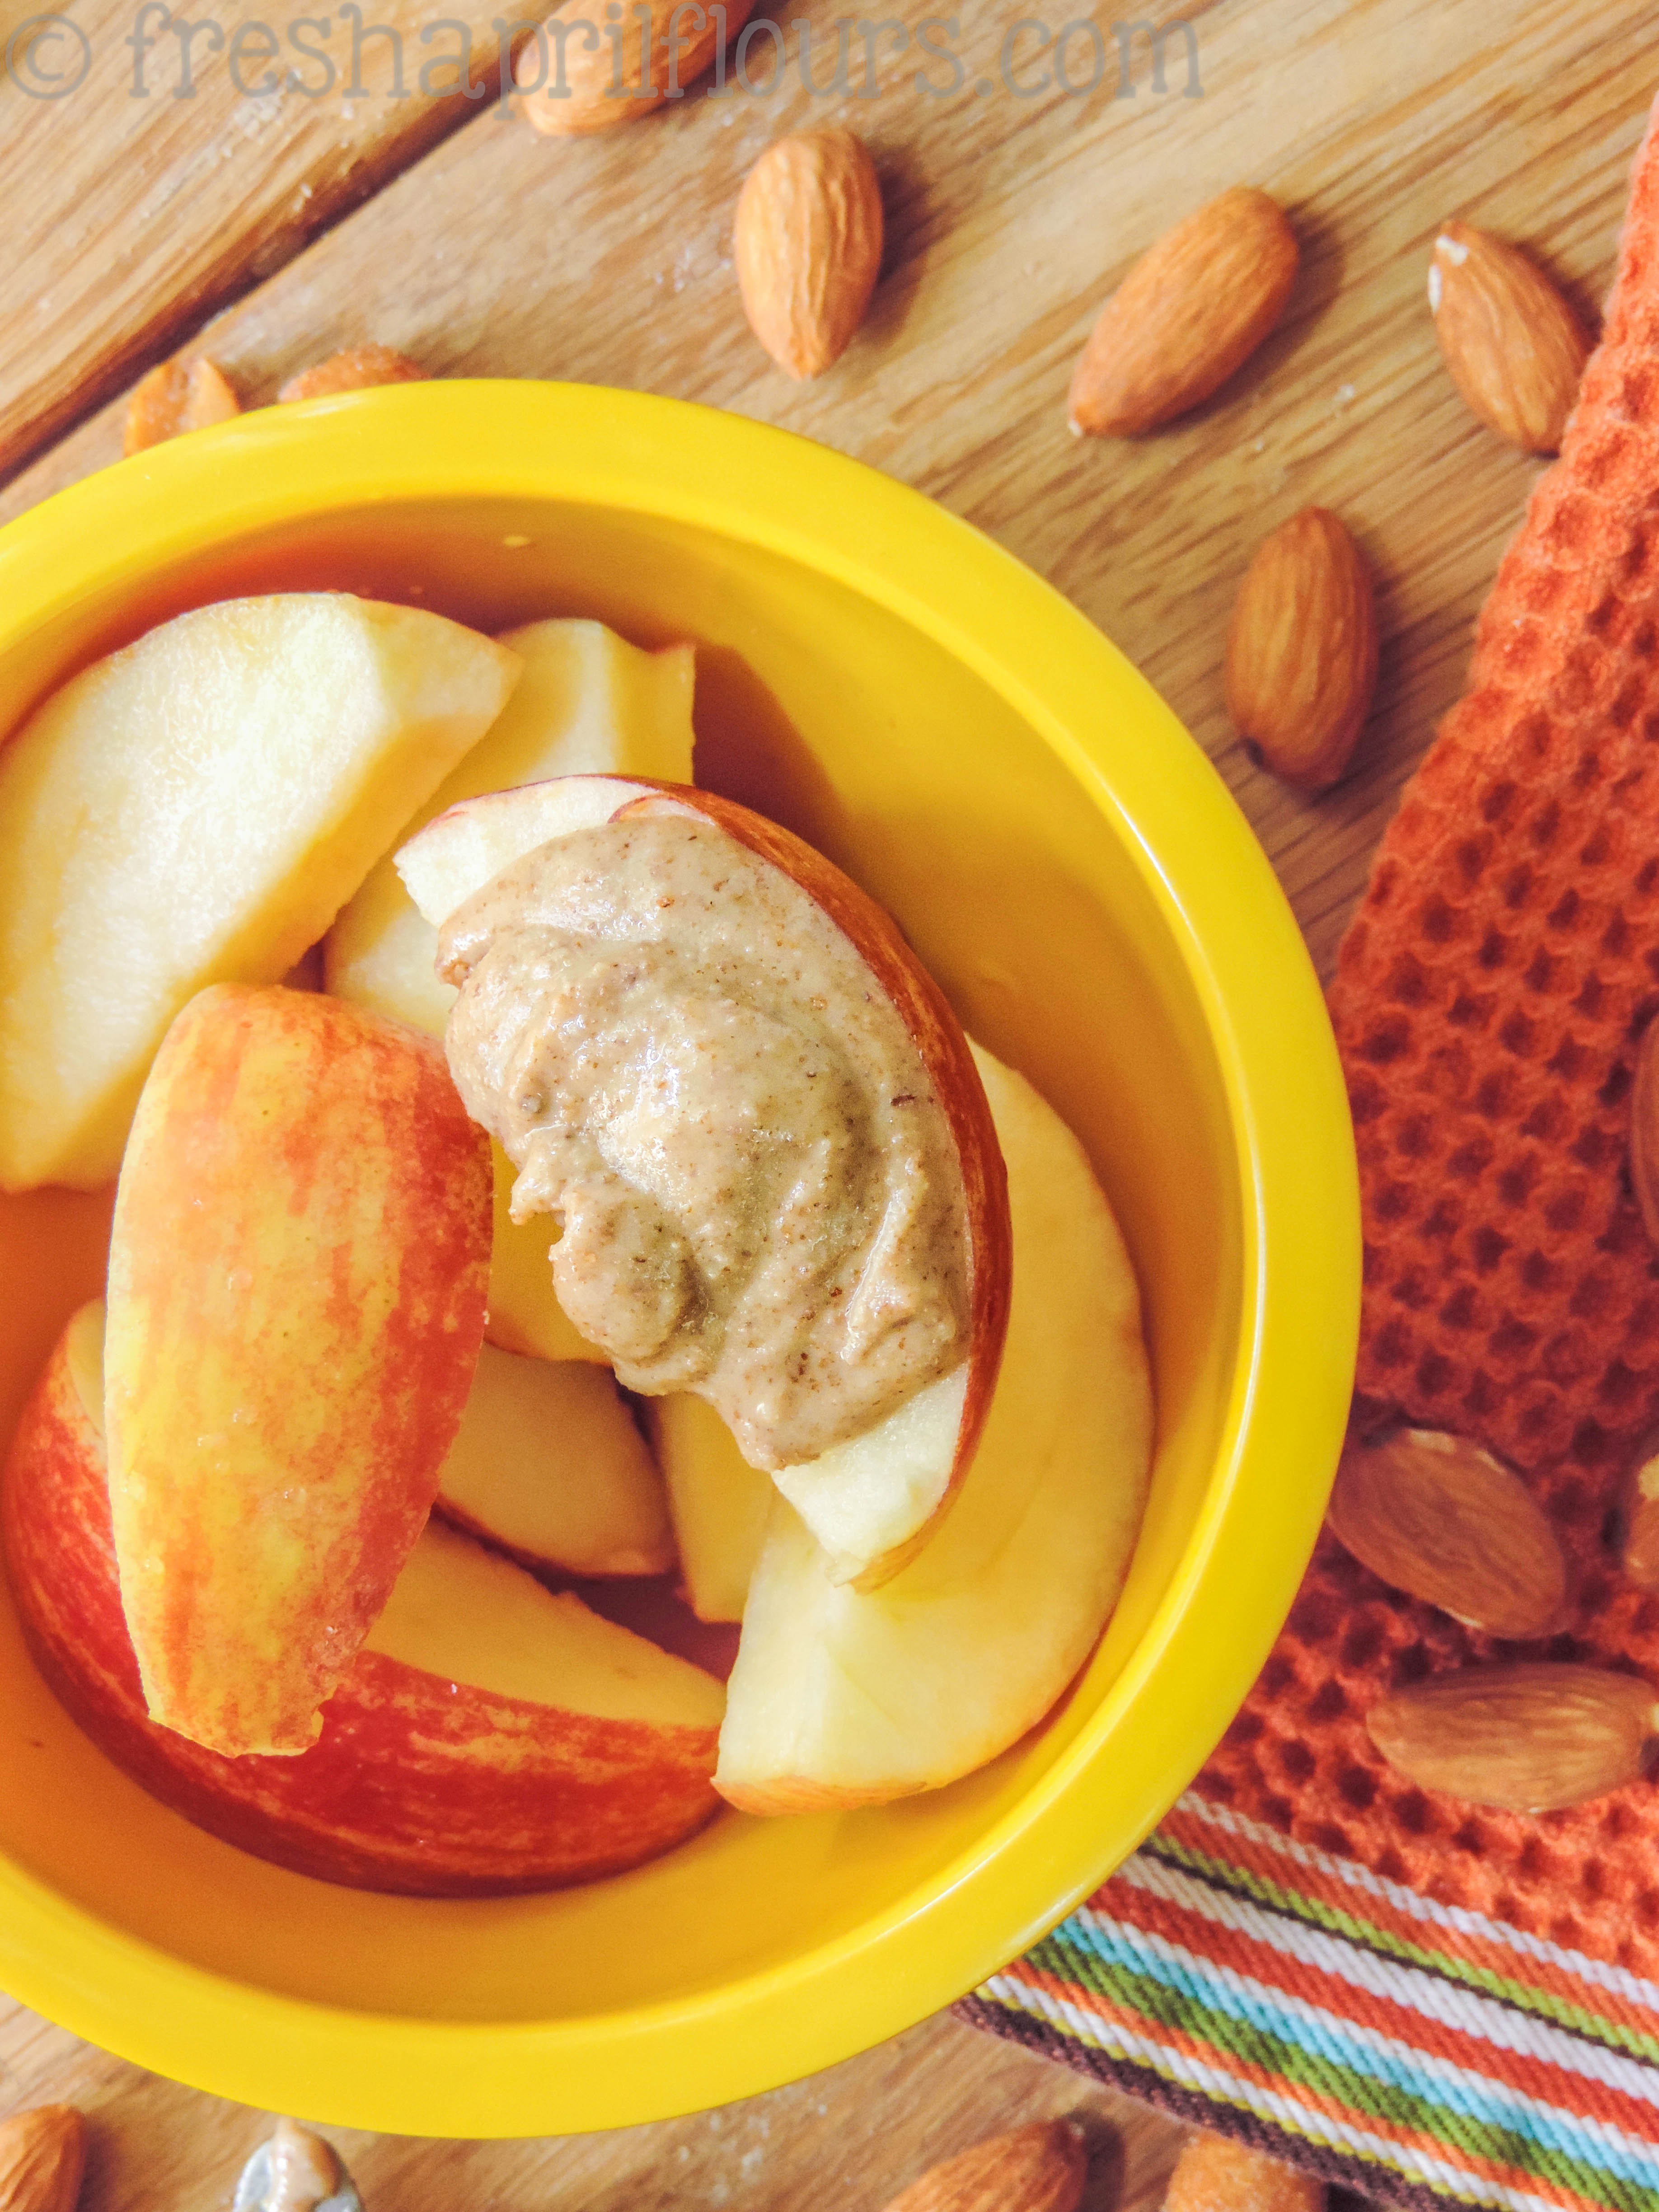 apples in a bowl with homemade almond butter spread on a slice